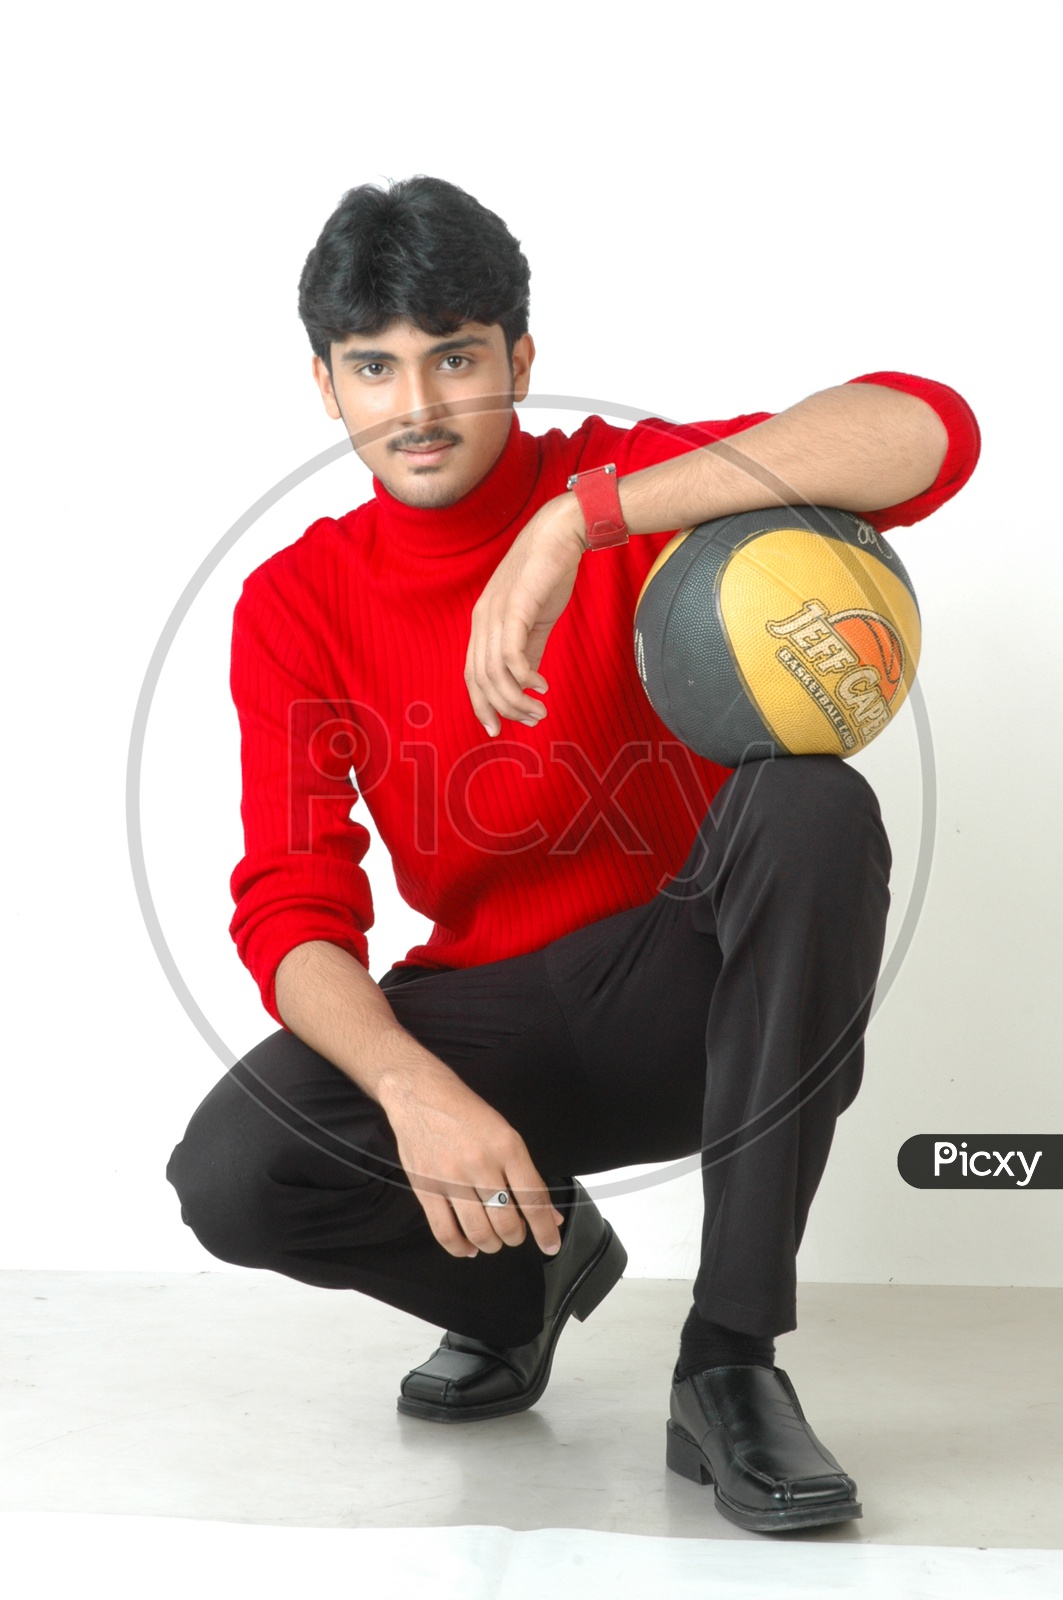 An Indian  Young Man With a Basket Ball In Hands And Posing On an Isolated White Background